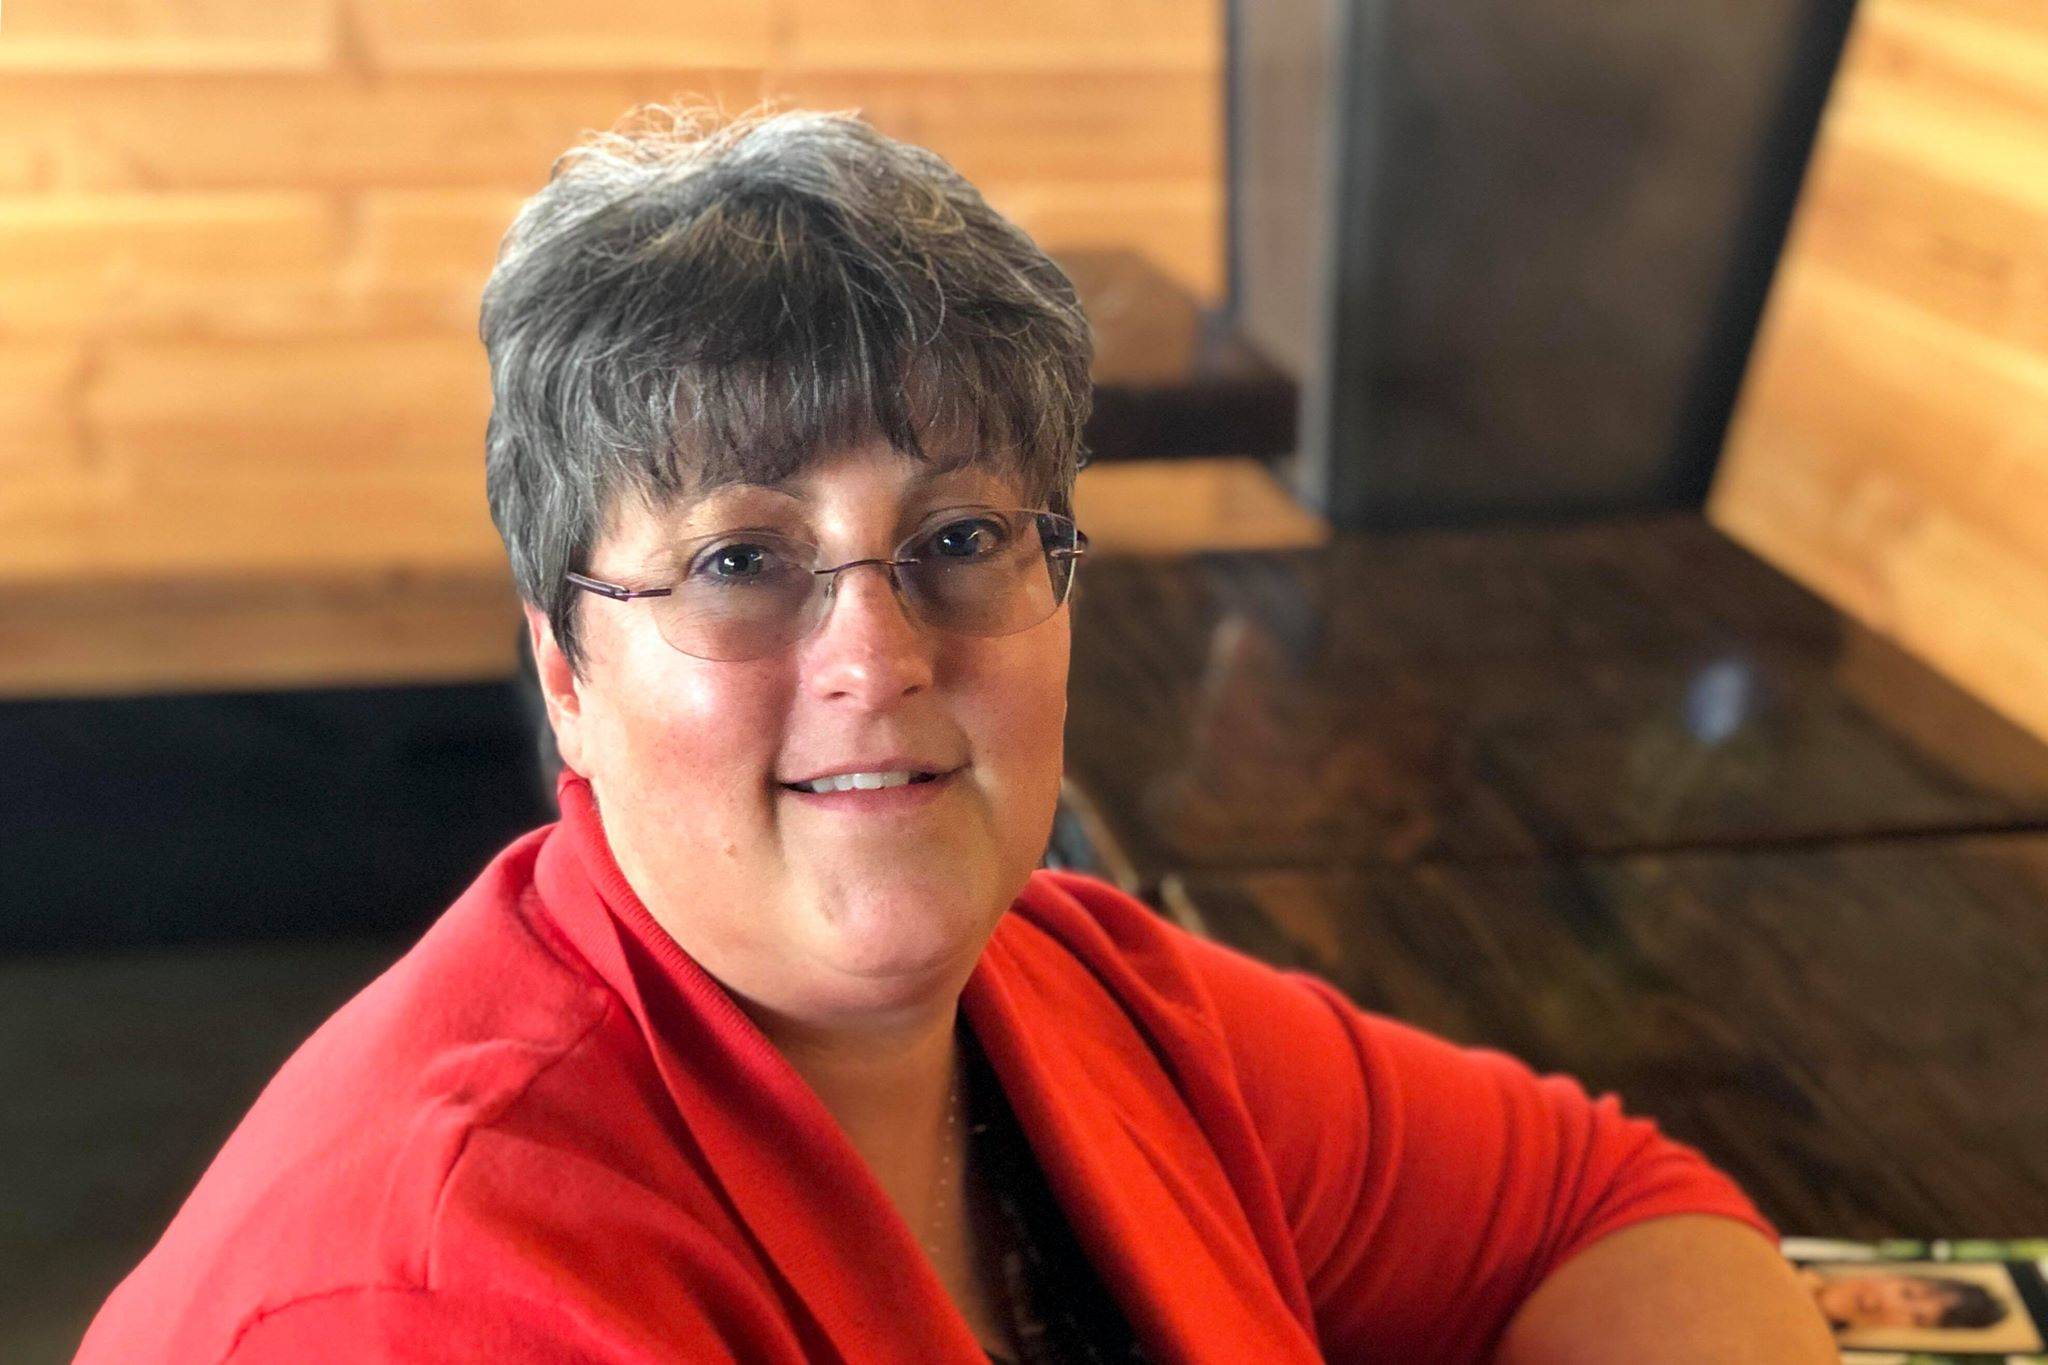 Soldotna resident Rose Henry is running for the Kenai Peninsula Borough Assembly’s District 4 seat. (Photo by Victoria Petersen/Peninsula Clarion)